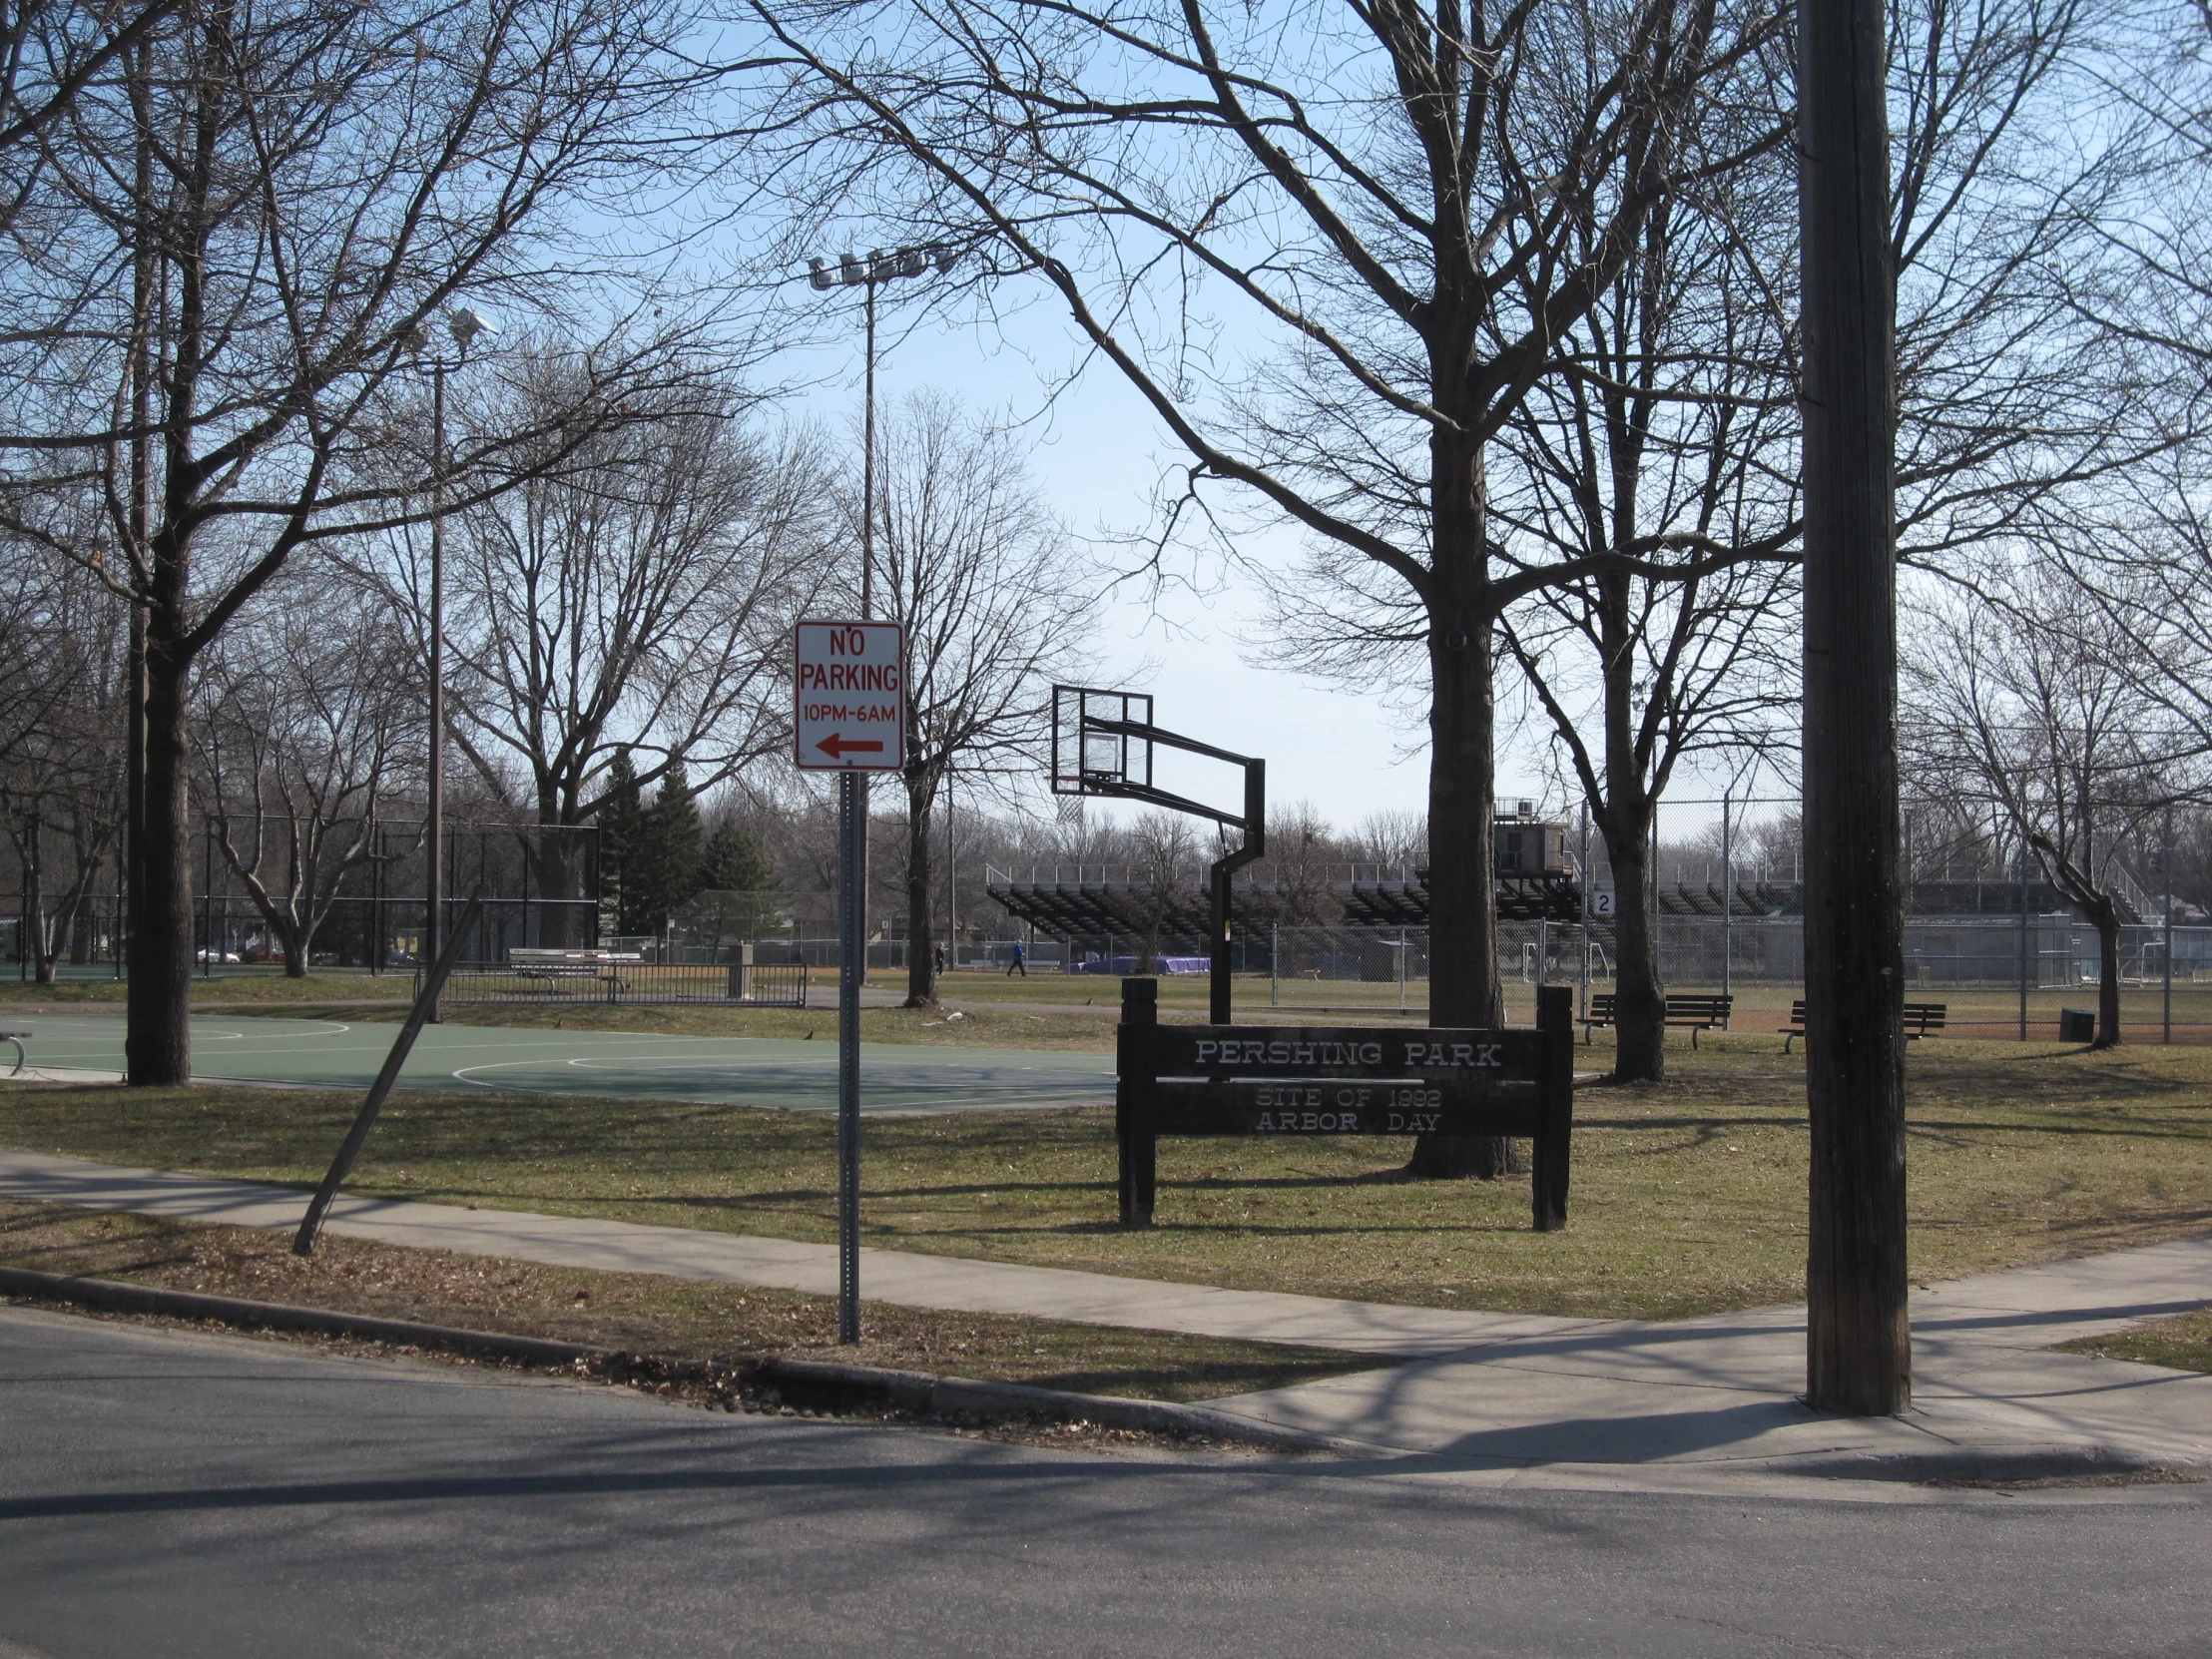 two basketball hoops and an empty basketball court in the park